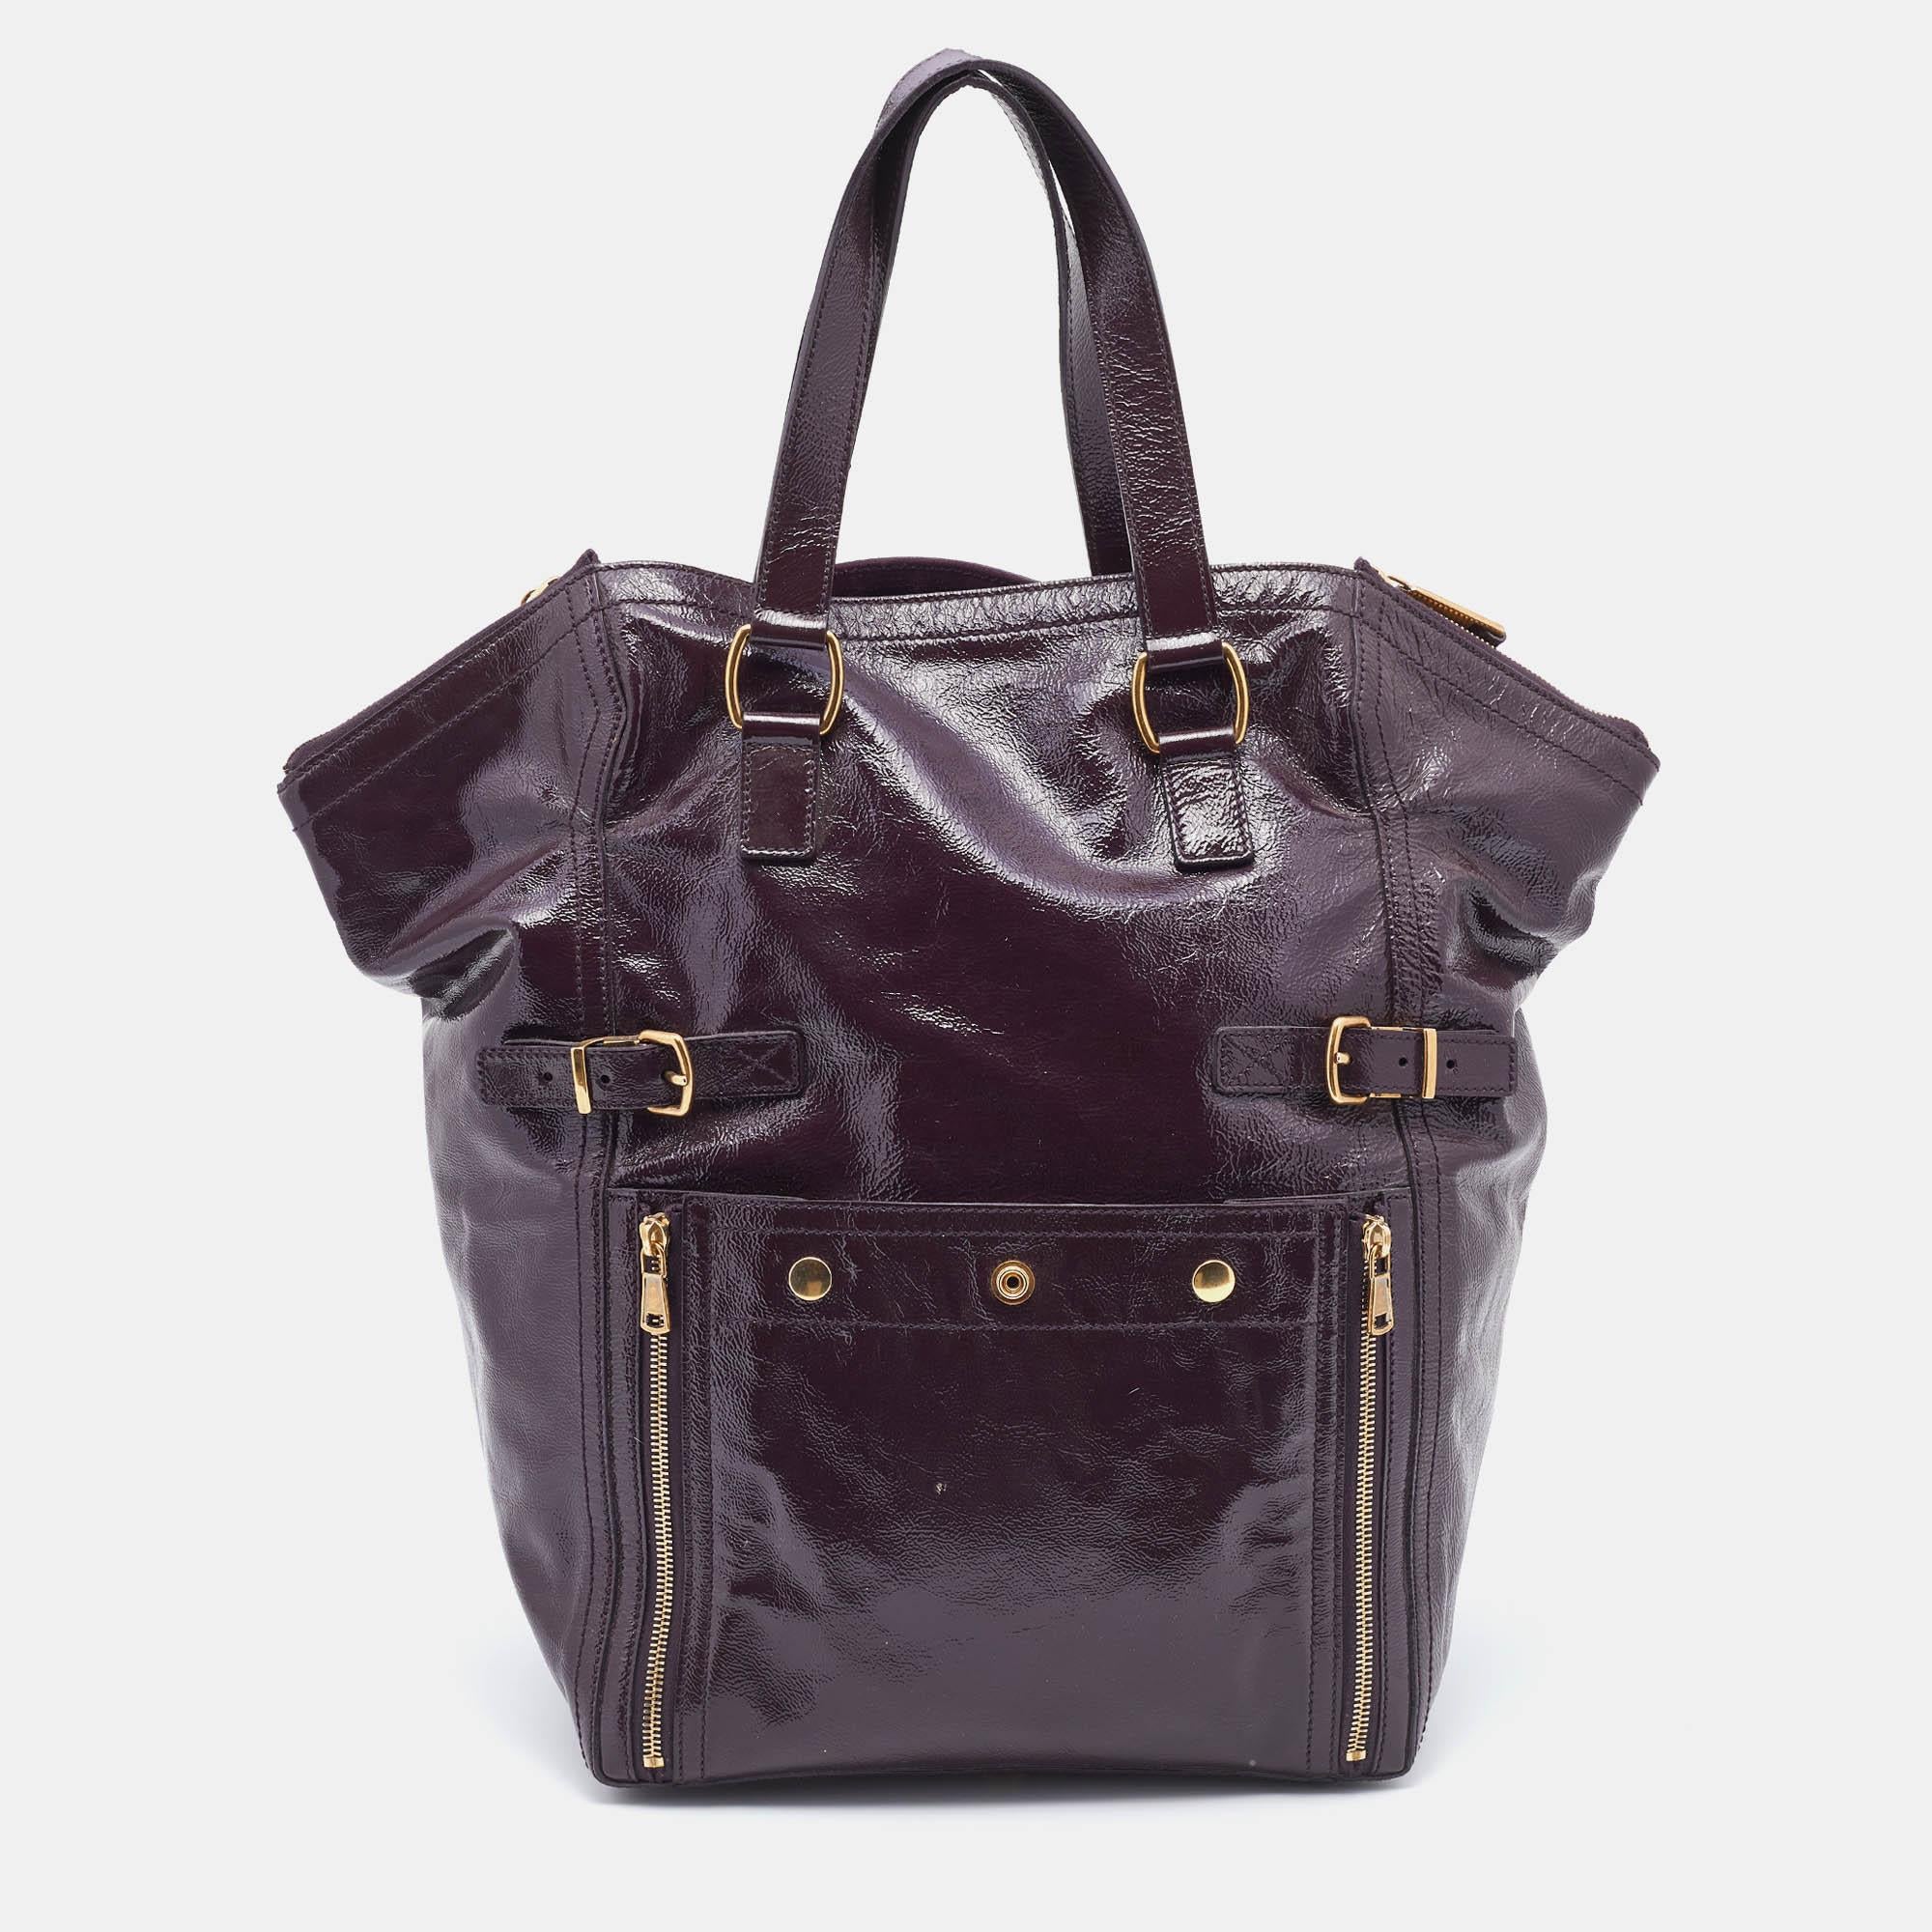 This gorgeous Downtown tote comes from the House of Saint Laurent. It is crafted from purple leather on the exterior. It features two handles, gold-toned hardware, and a suede-lined interior. This stunning creation is ideal for everyday use.

